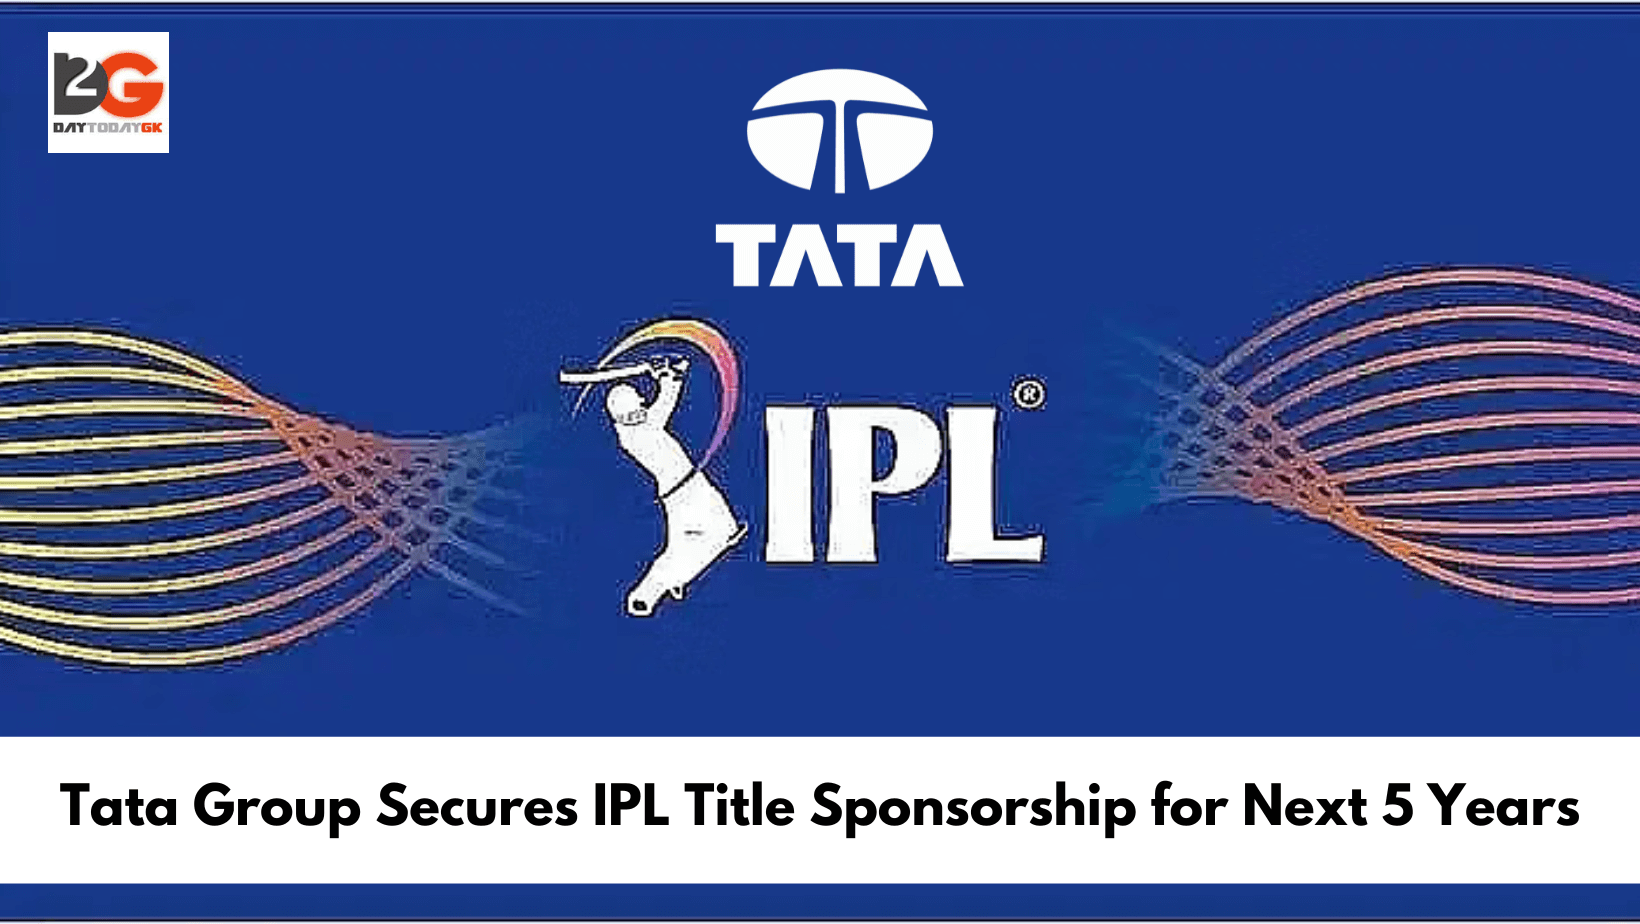 Tata Group Secures IPL Title Sponsorship for Next 5 Years